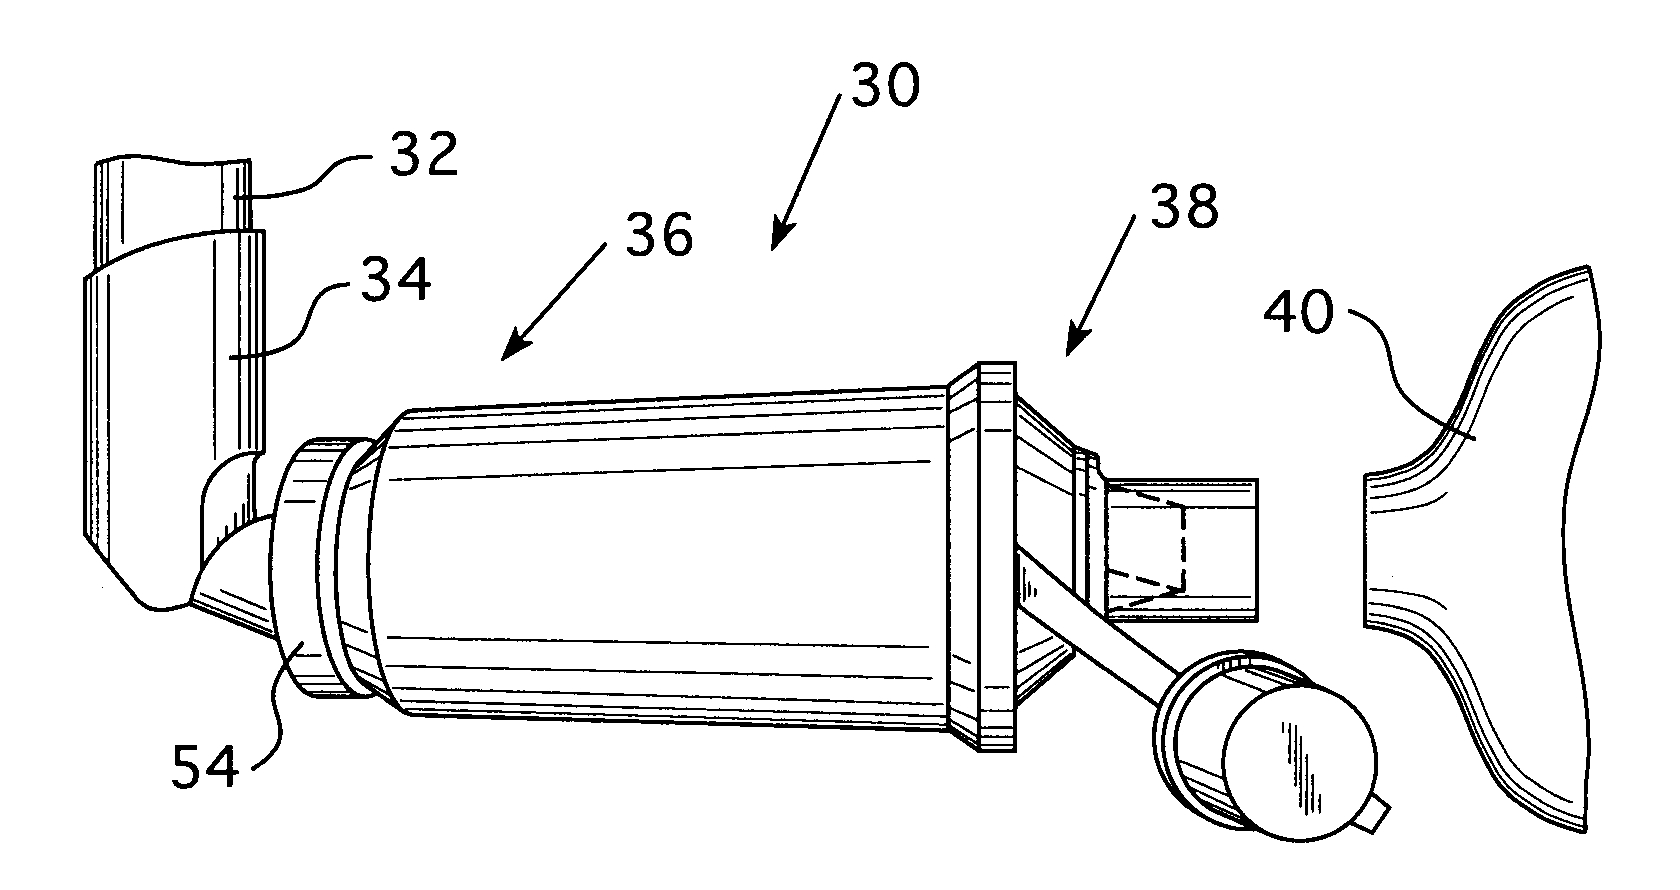 Valved holding chamber for use with an aerosol medication delivery system